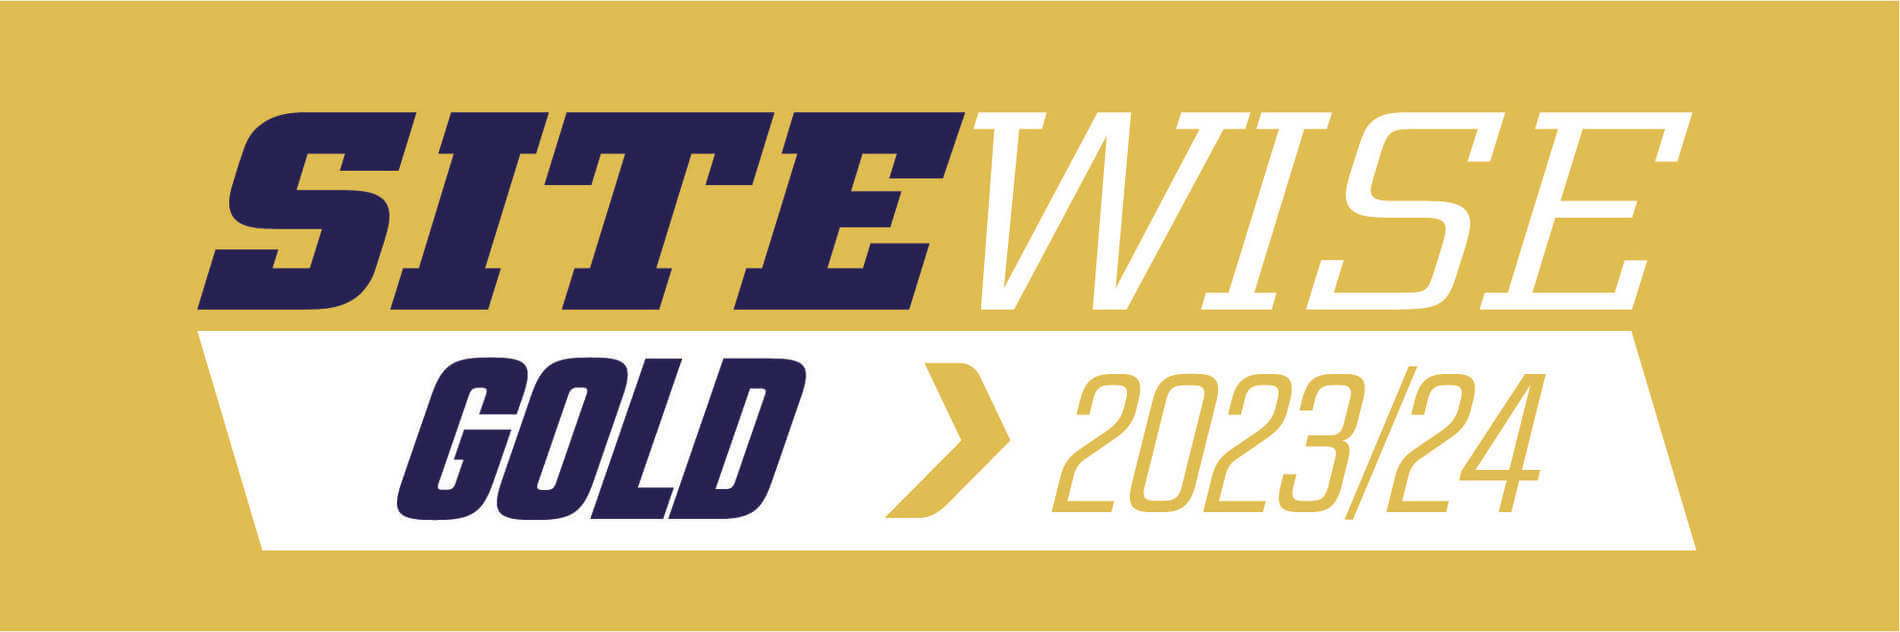 Site Wise Gold 2022/23